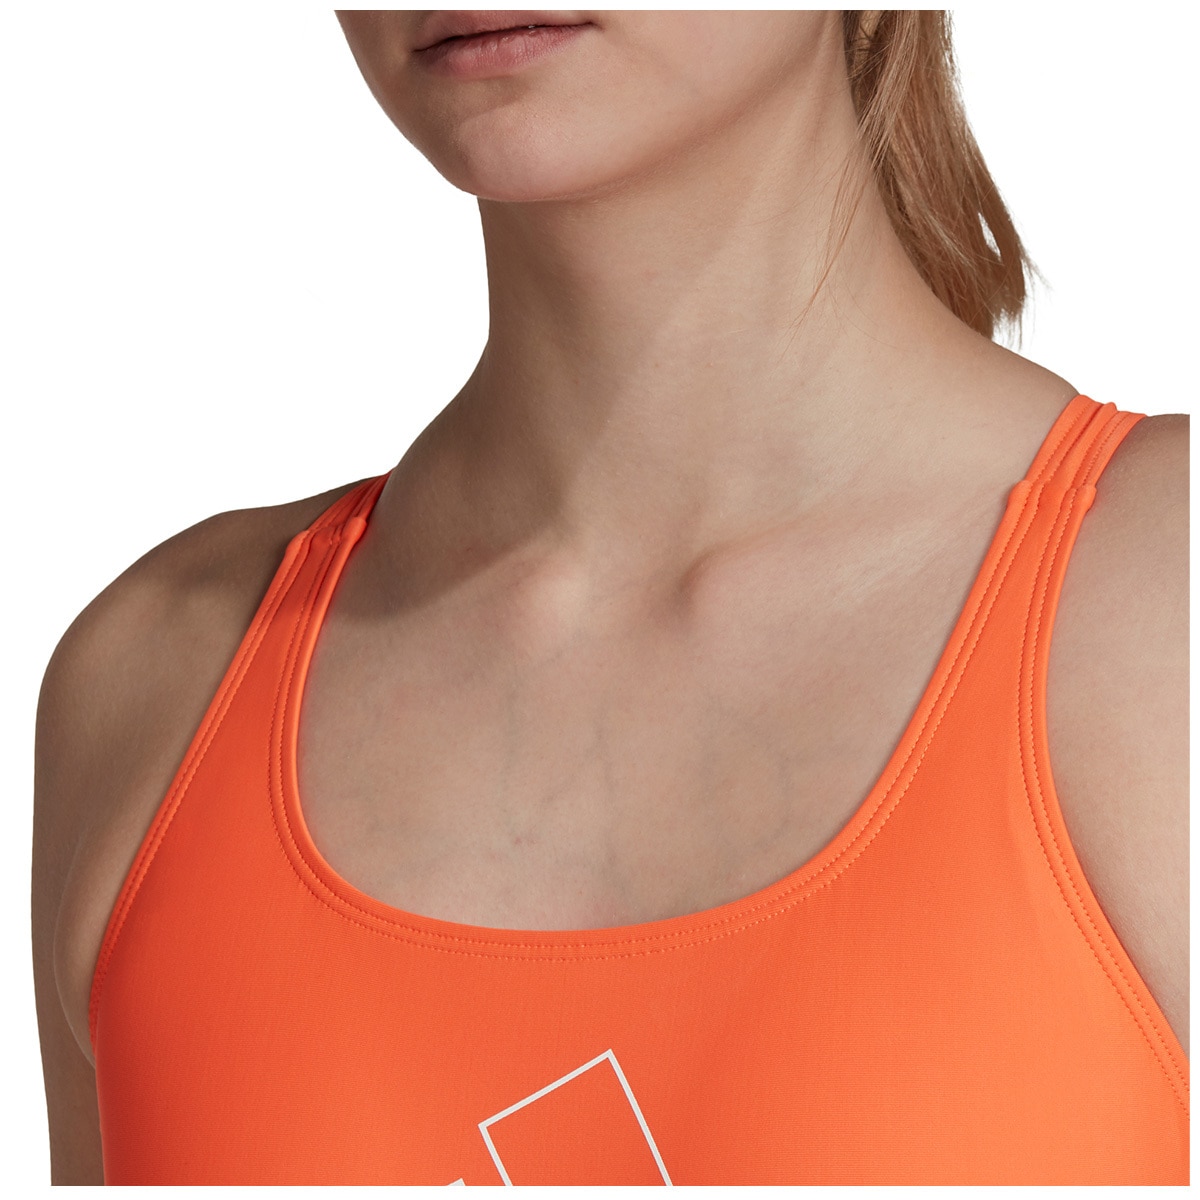 Adidas Women's One Piece - Coral